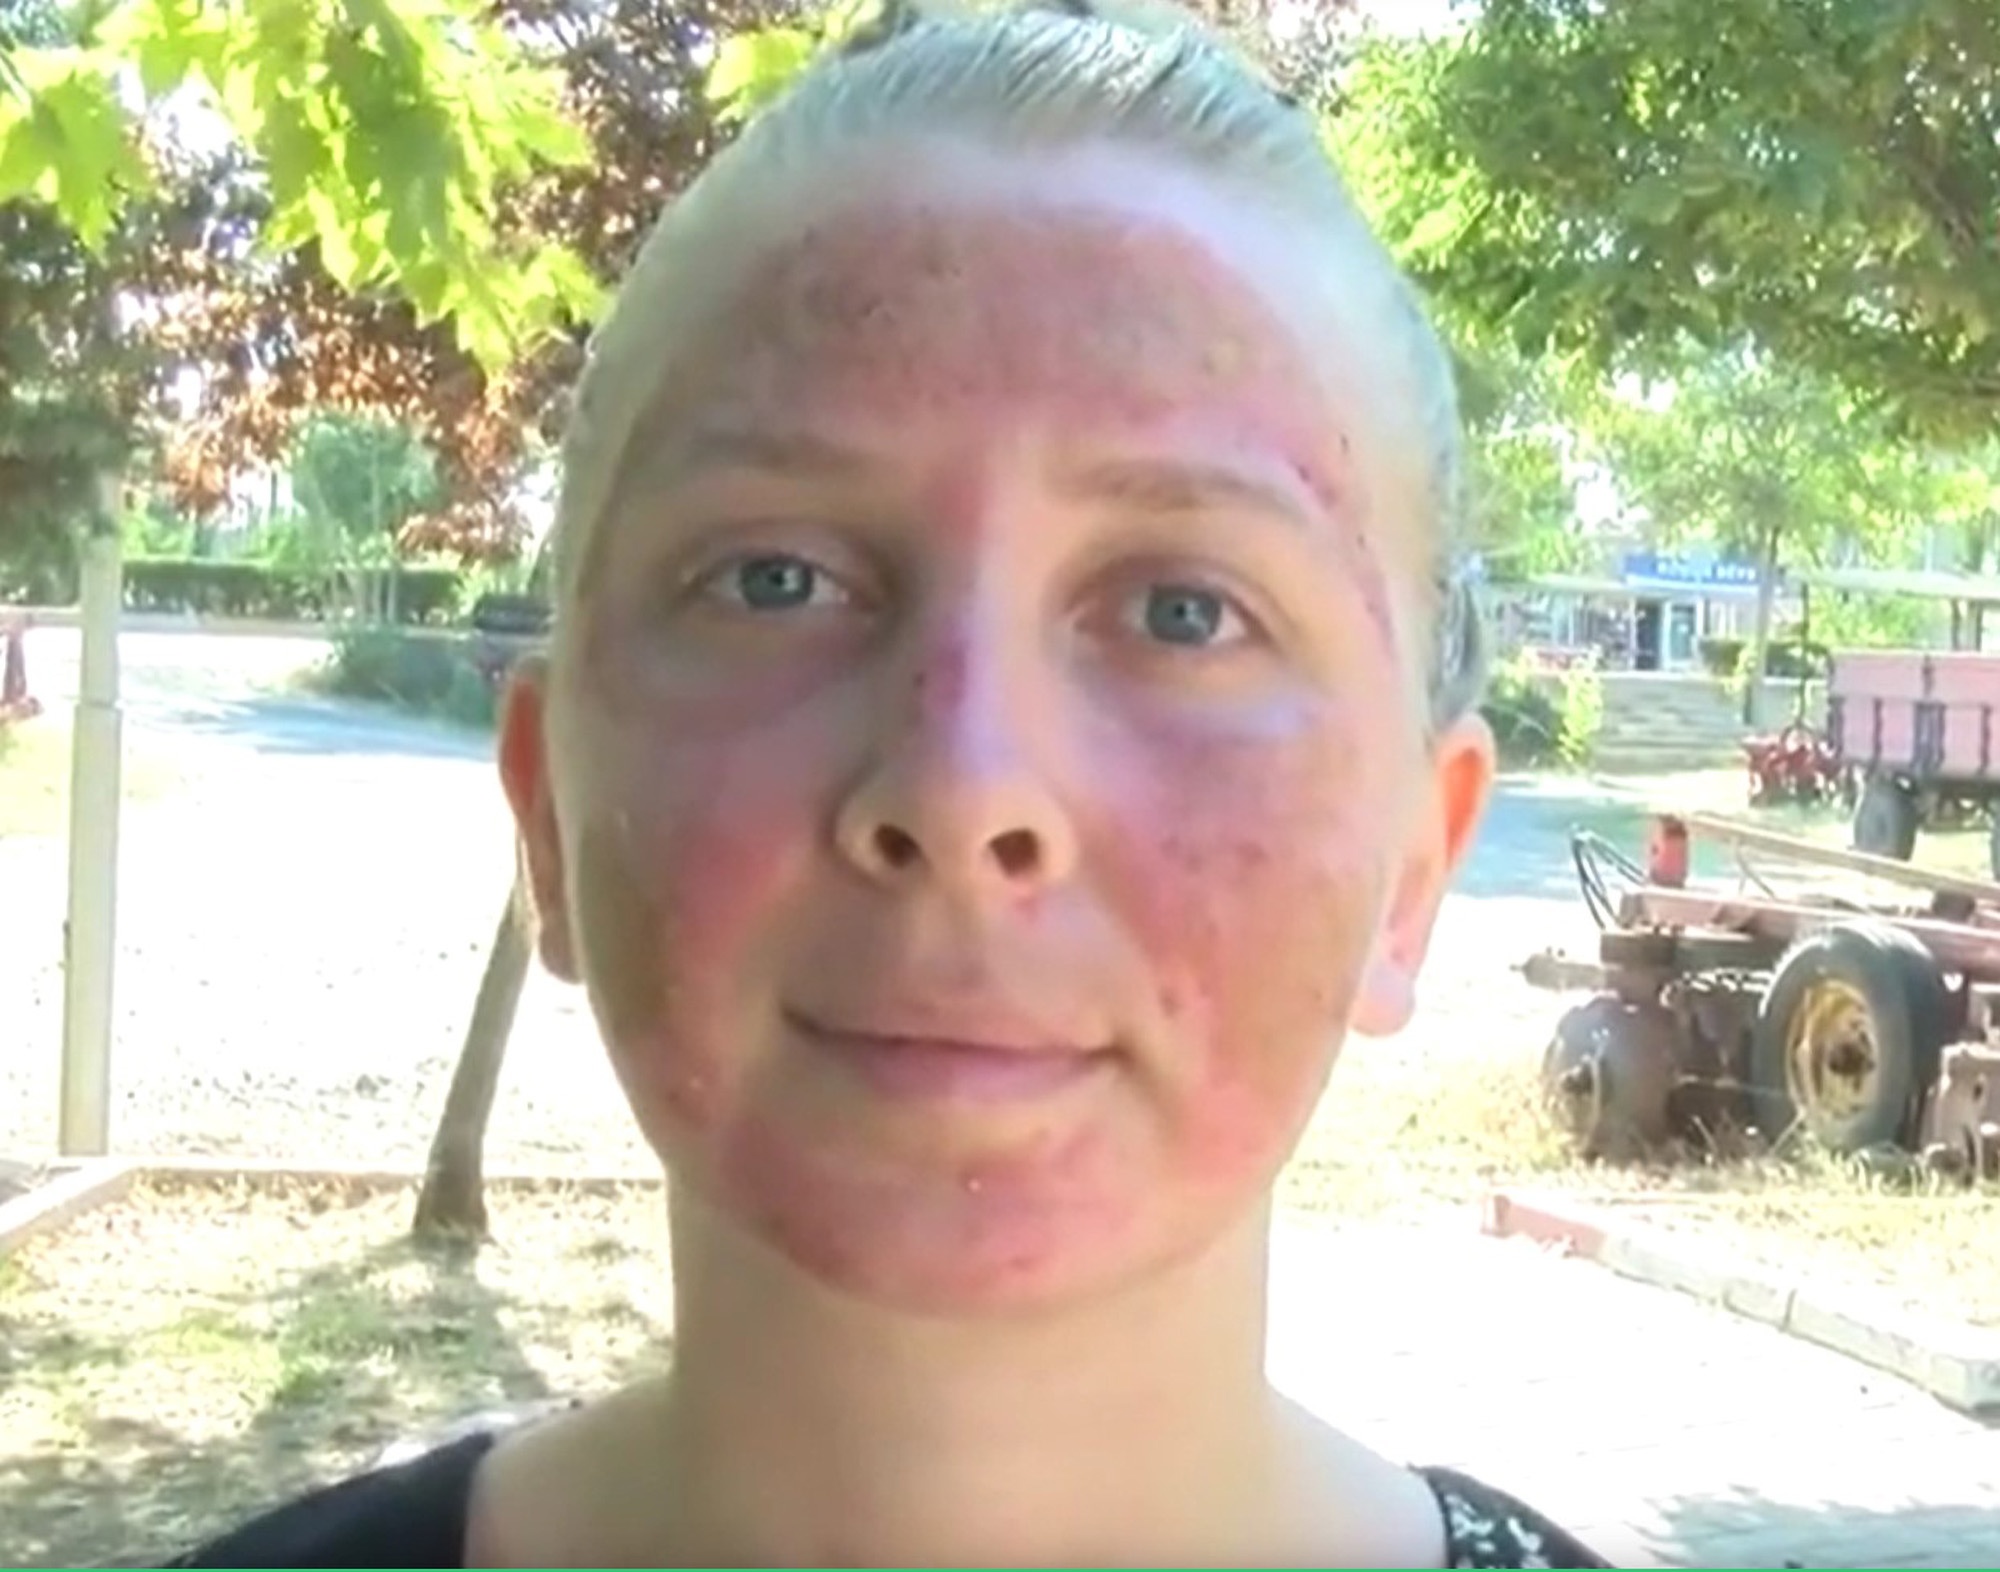 chemical burn from face wash